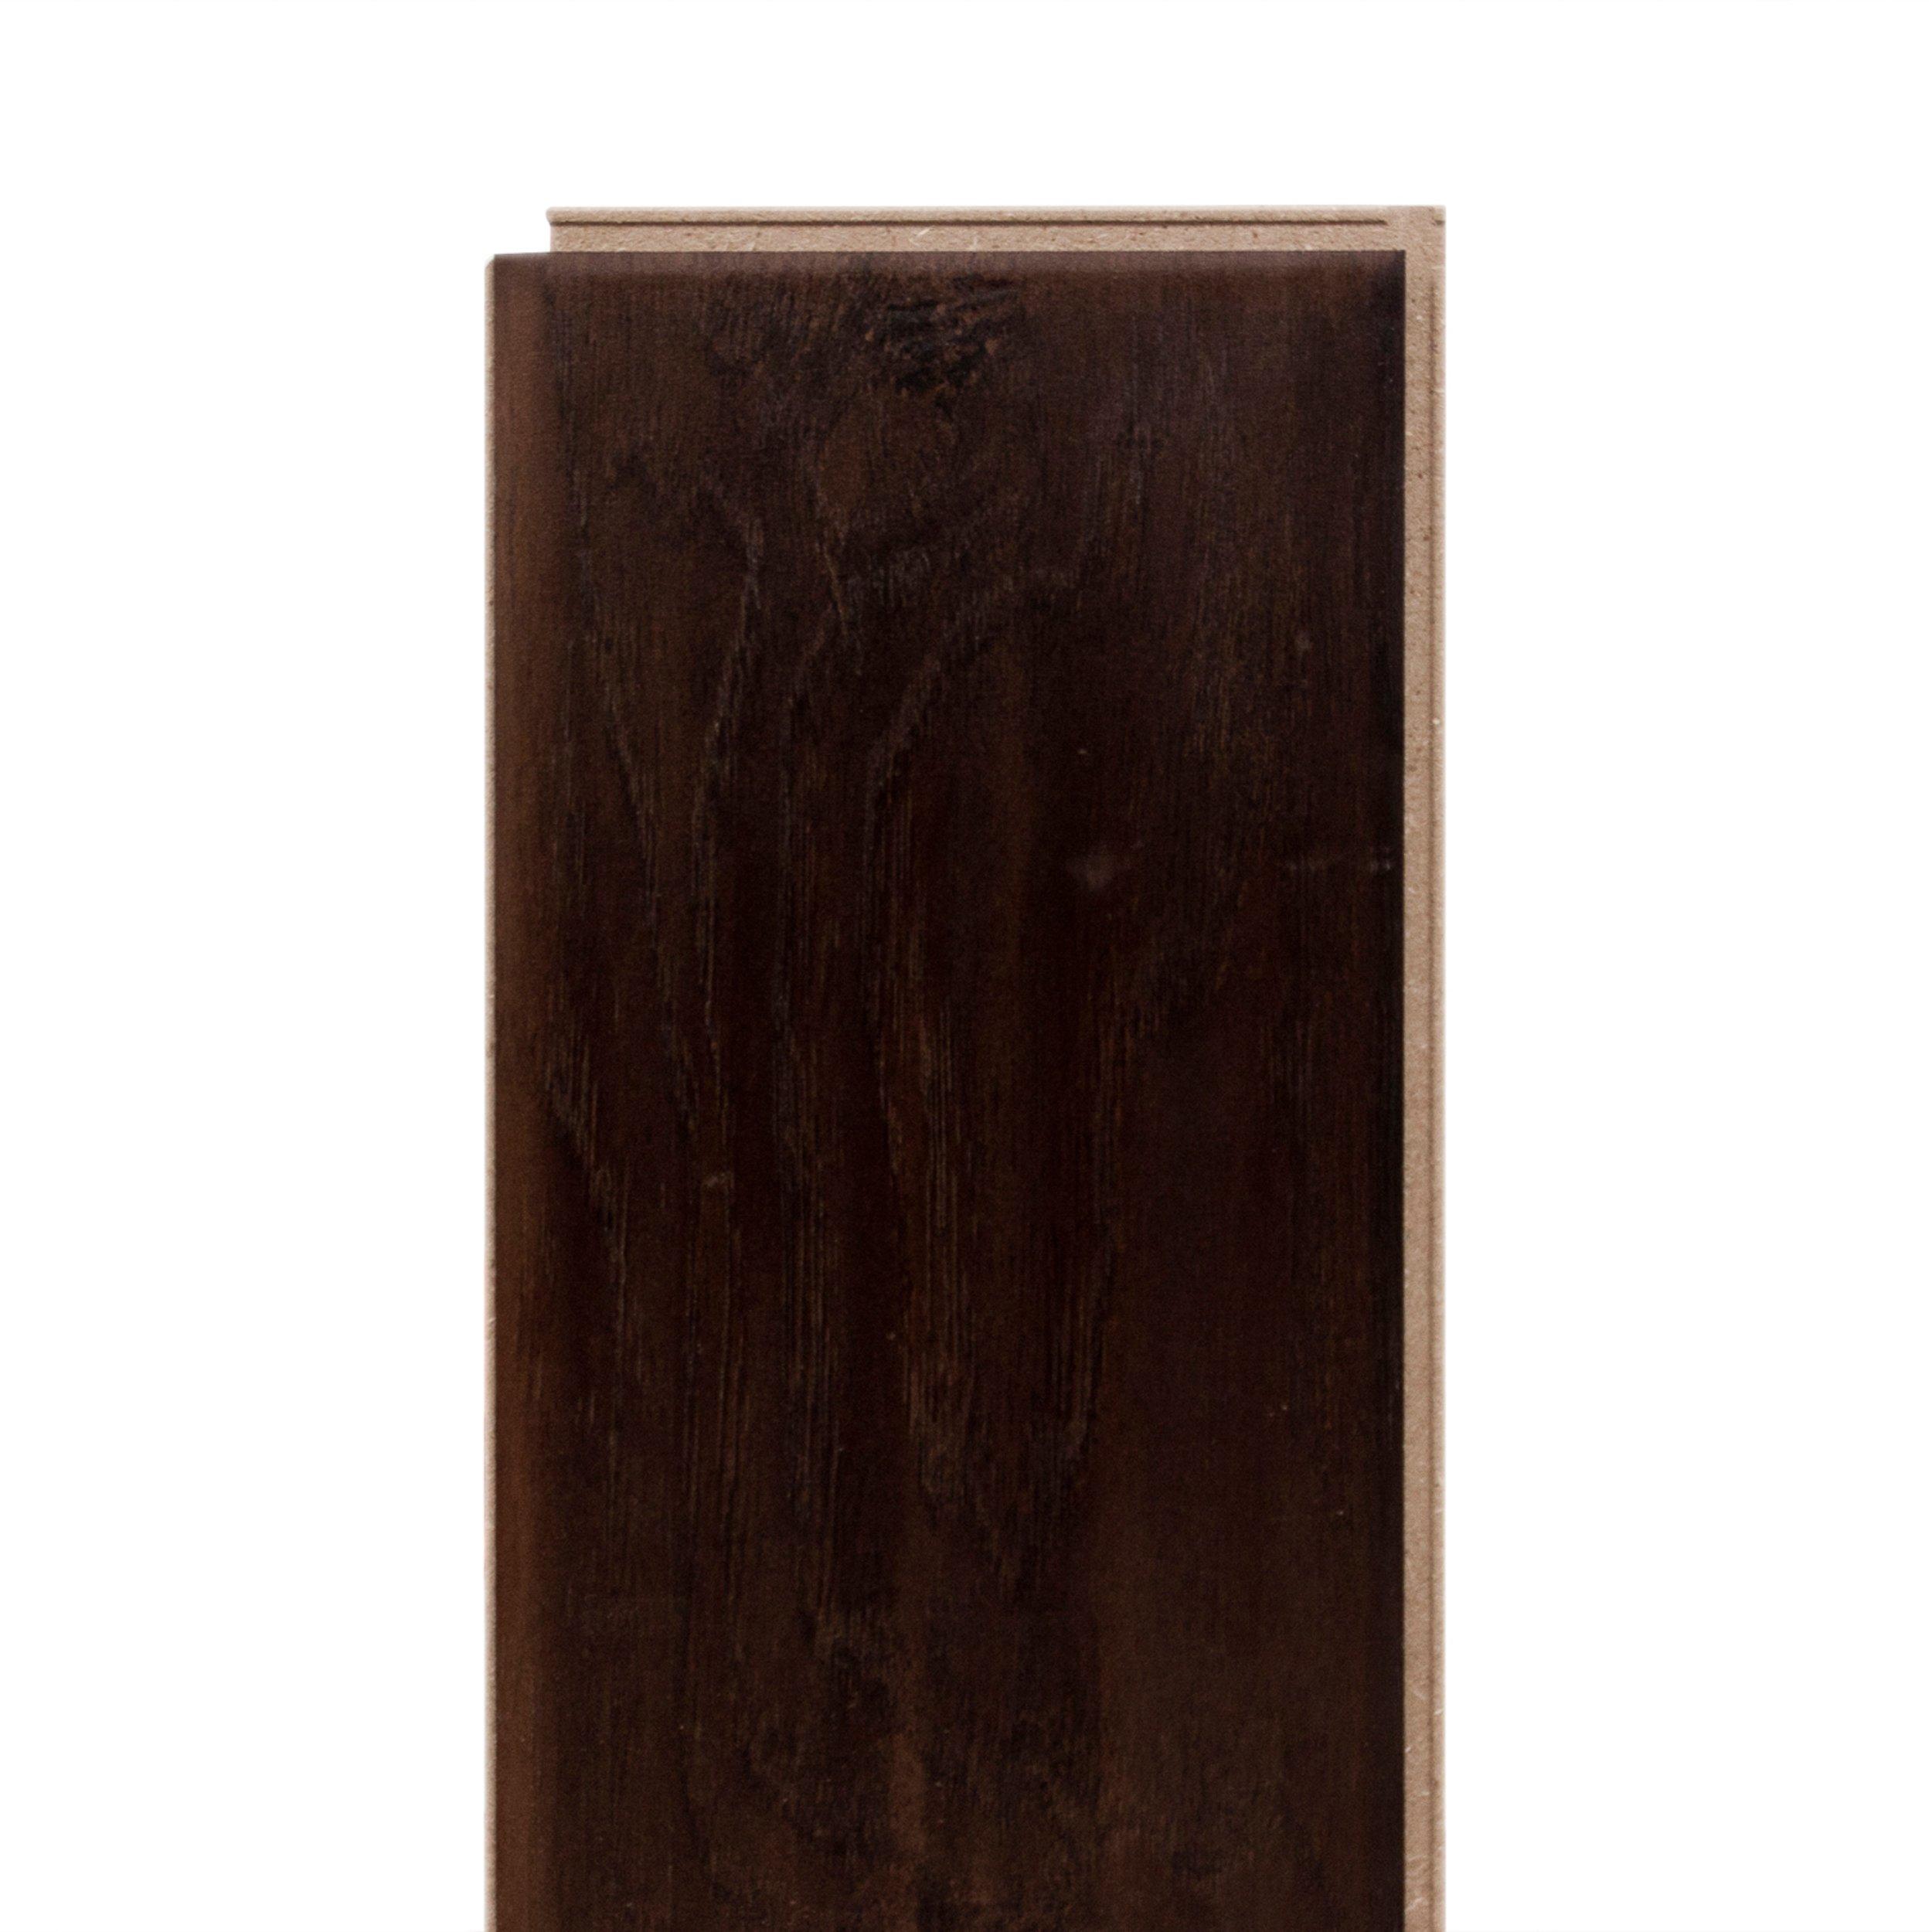 Brooksville Hickory Water-Resistant Laminate